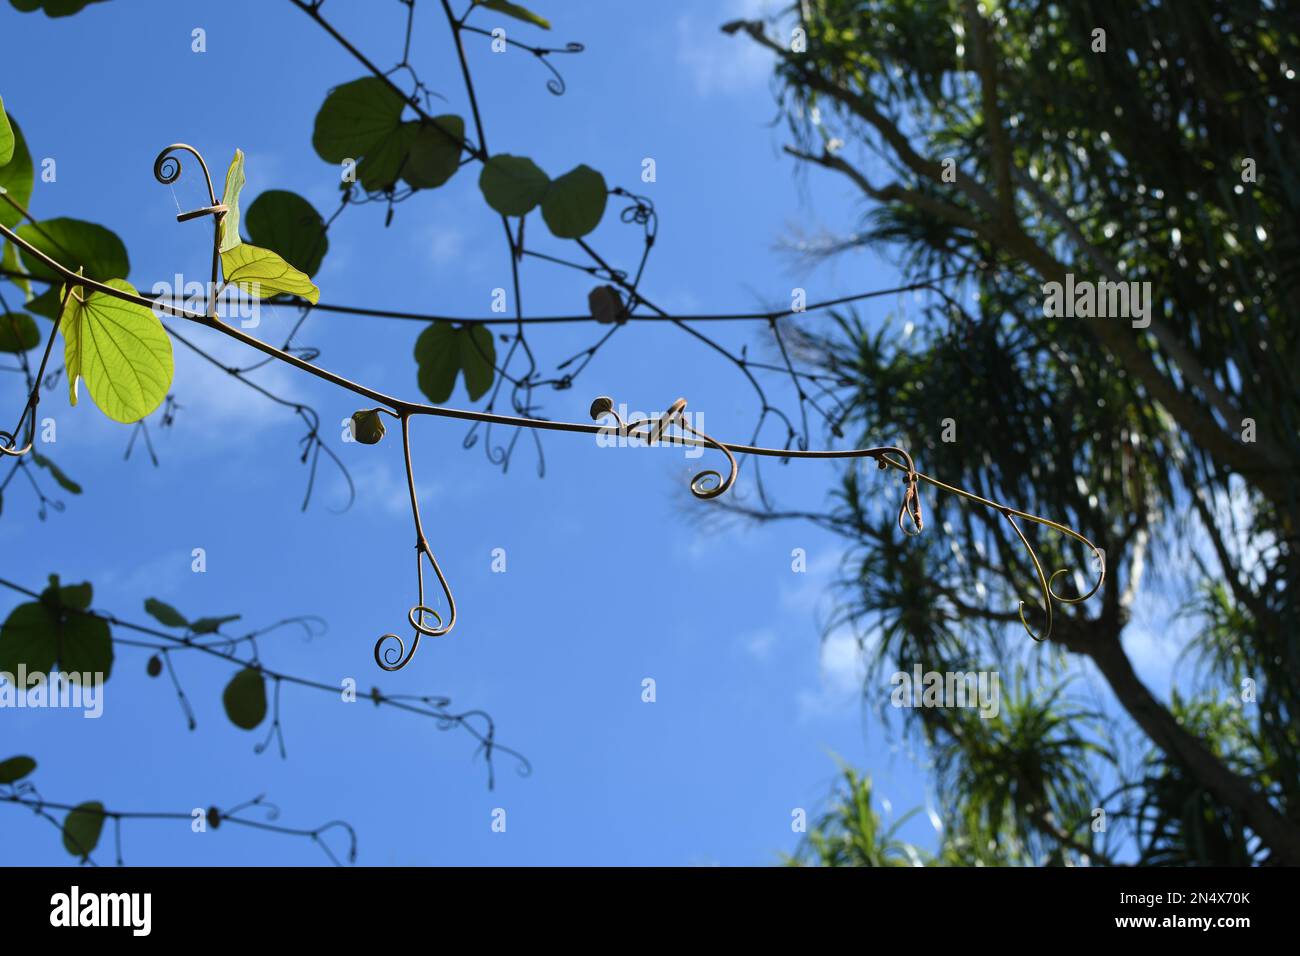 Vine branch with tendrils and young leaves, fresh young vine leaves on the blue sky background Stock Photo